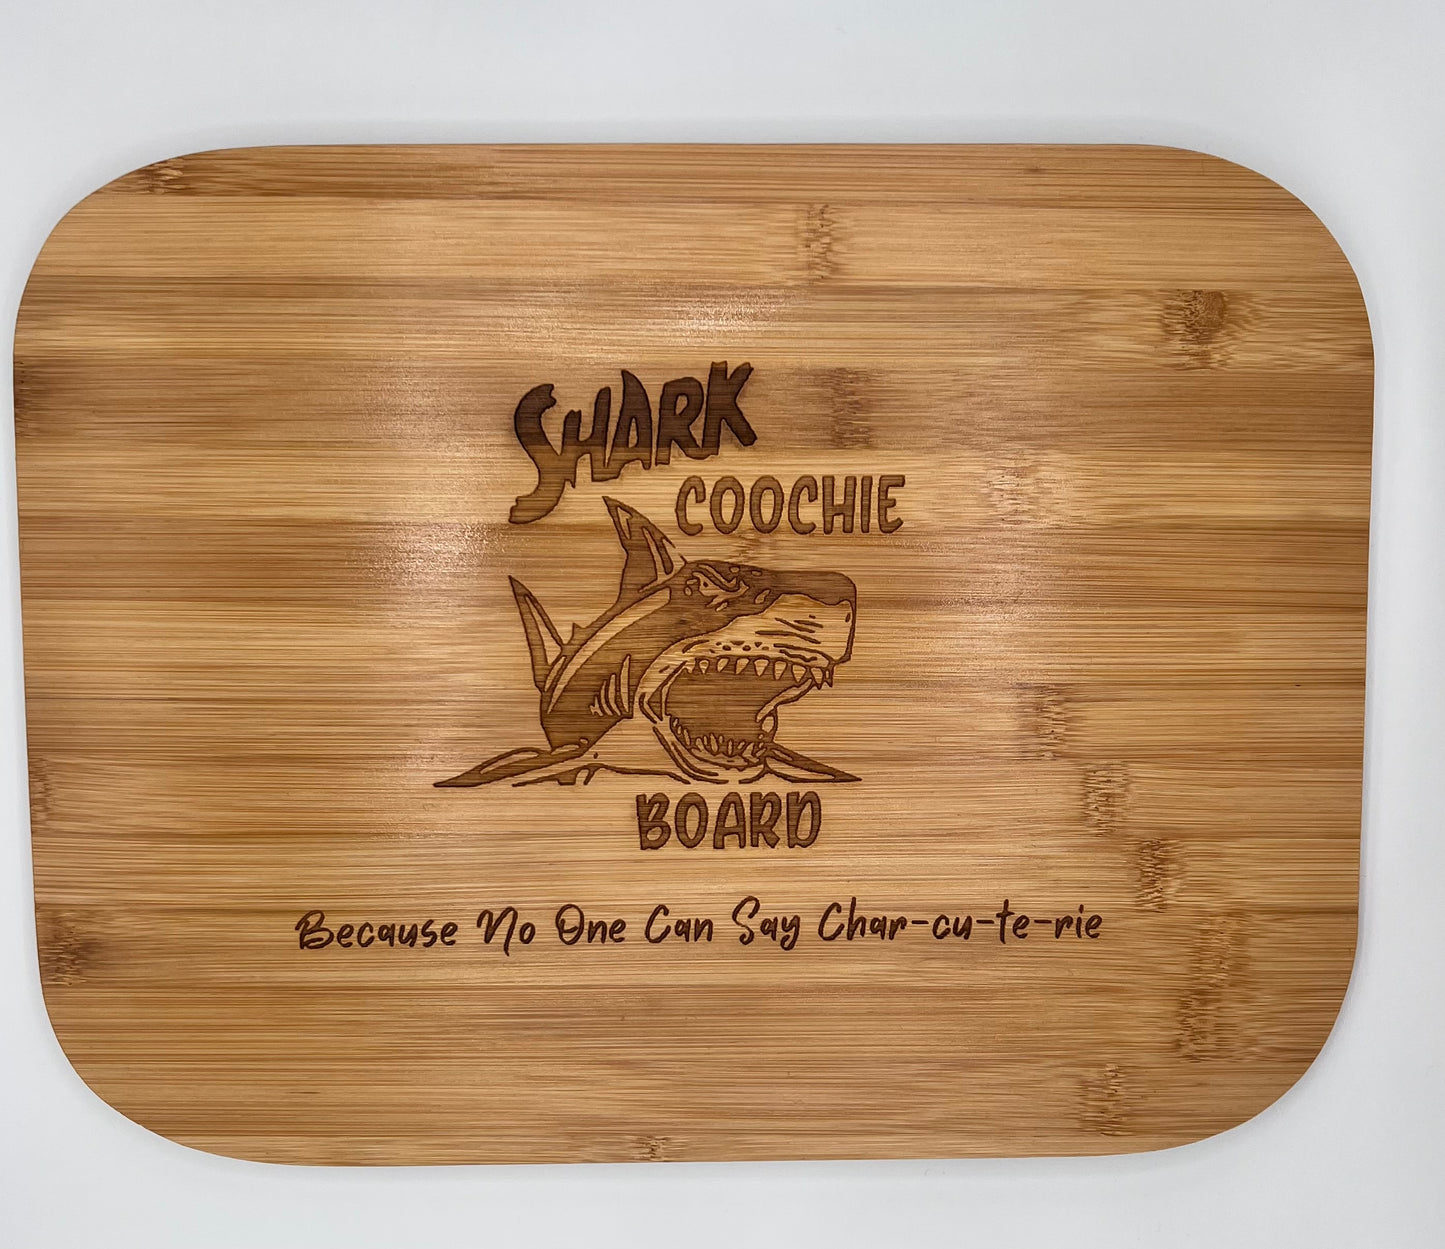 Shark Coochie Engraved on Bamboo Board